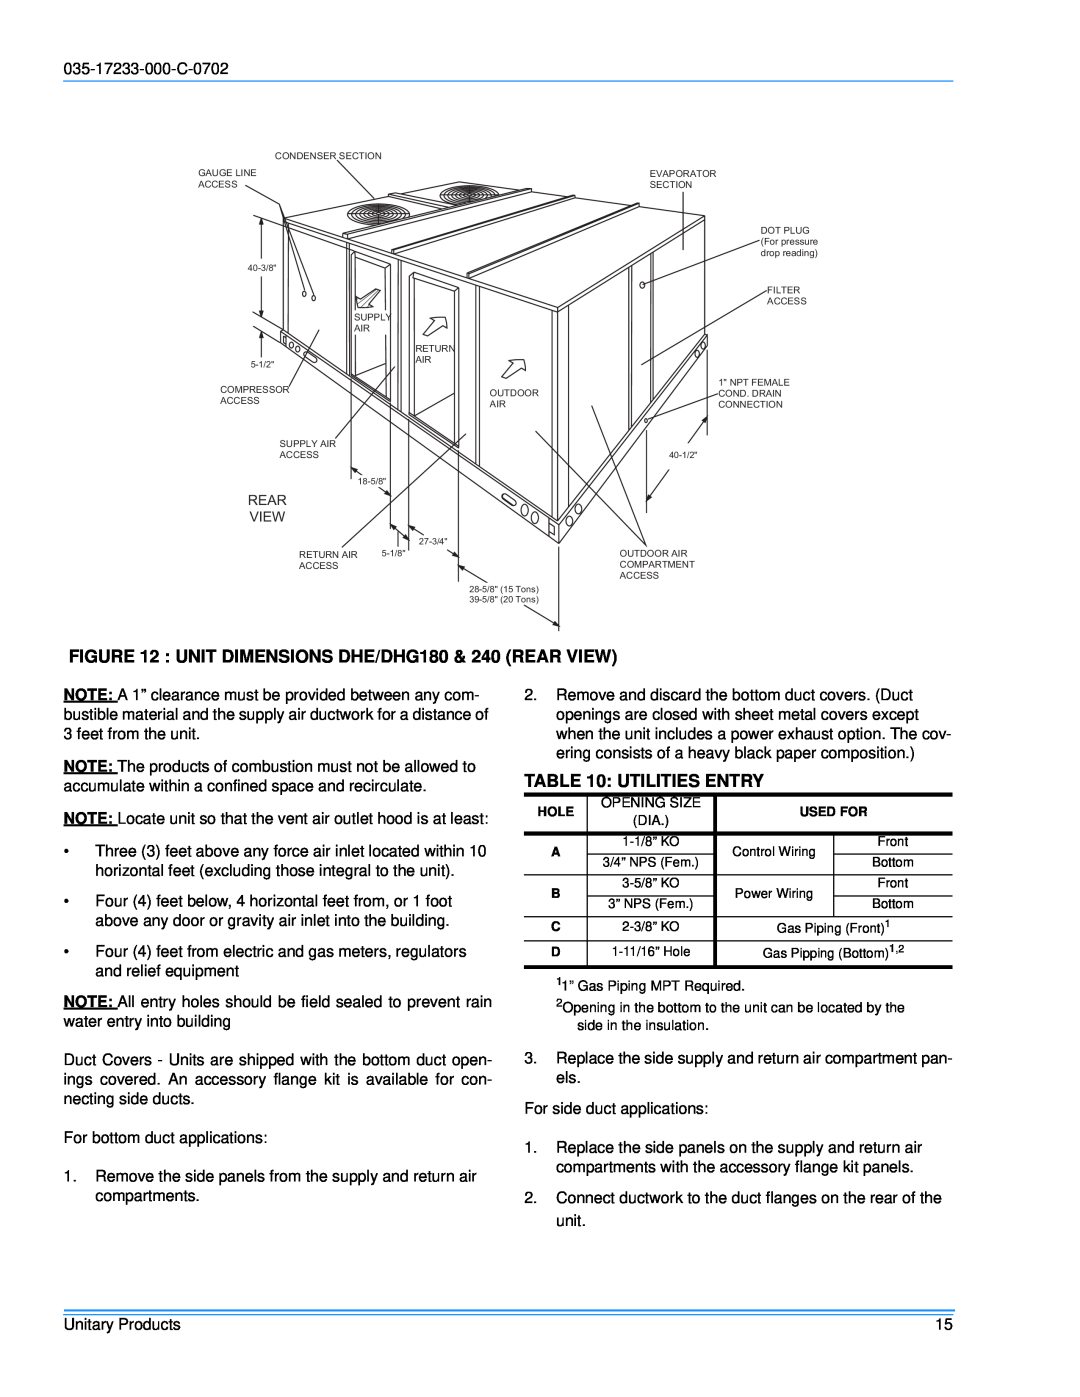 Energy Tech Laboratories DHG180, DHG240 installation instructions Utilities Entry 